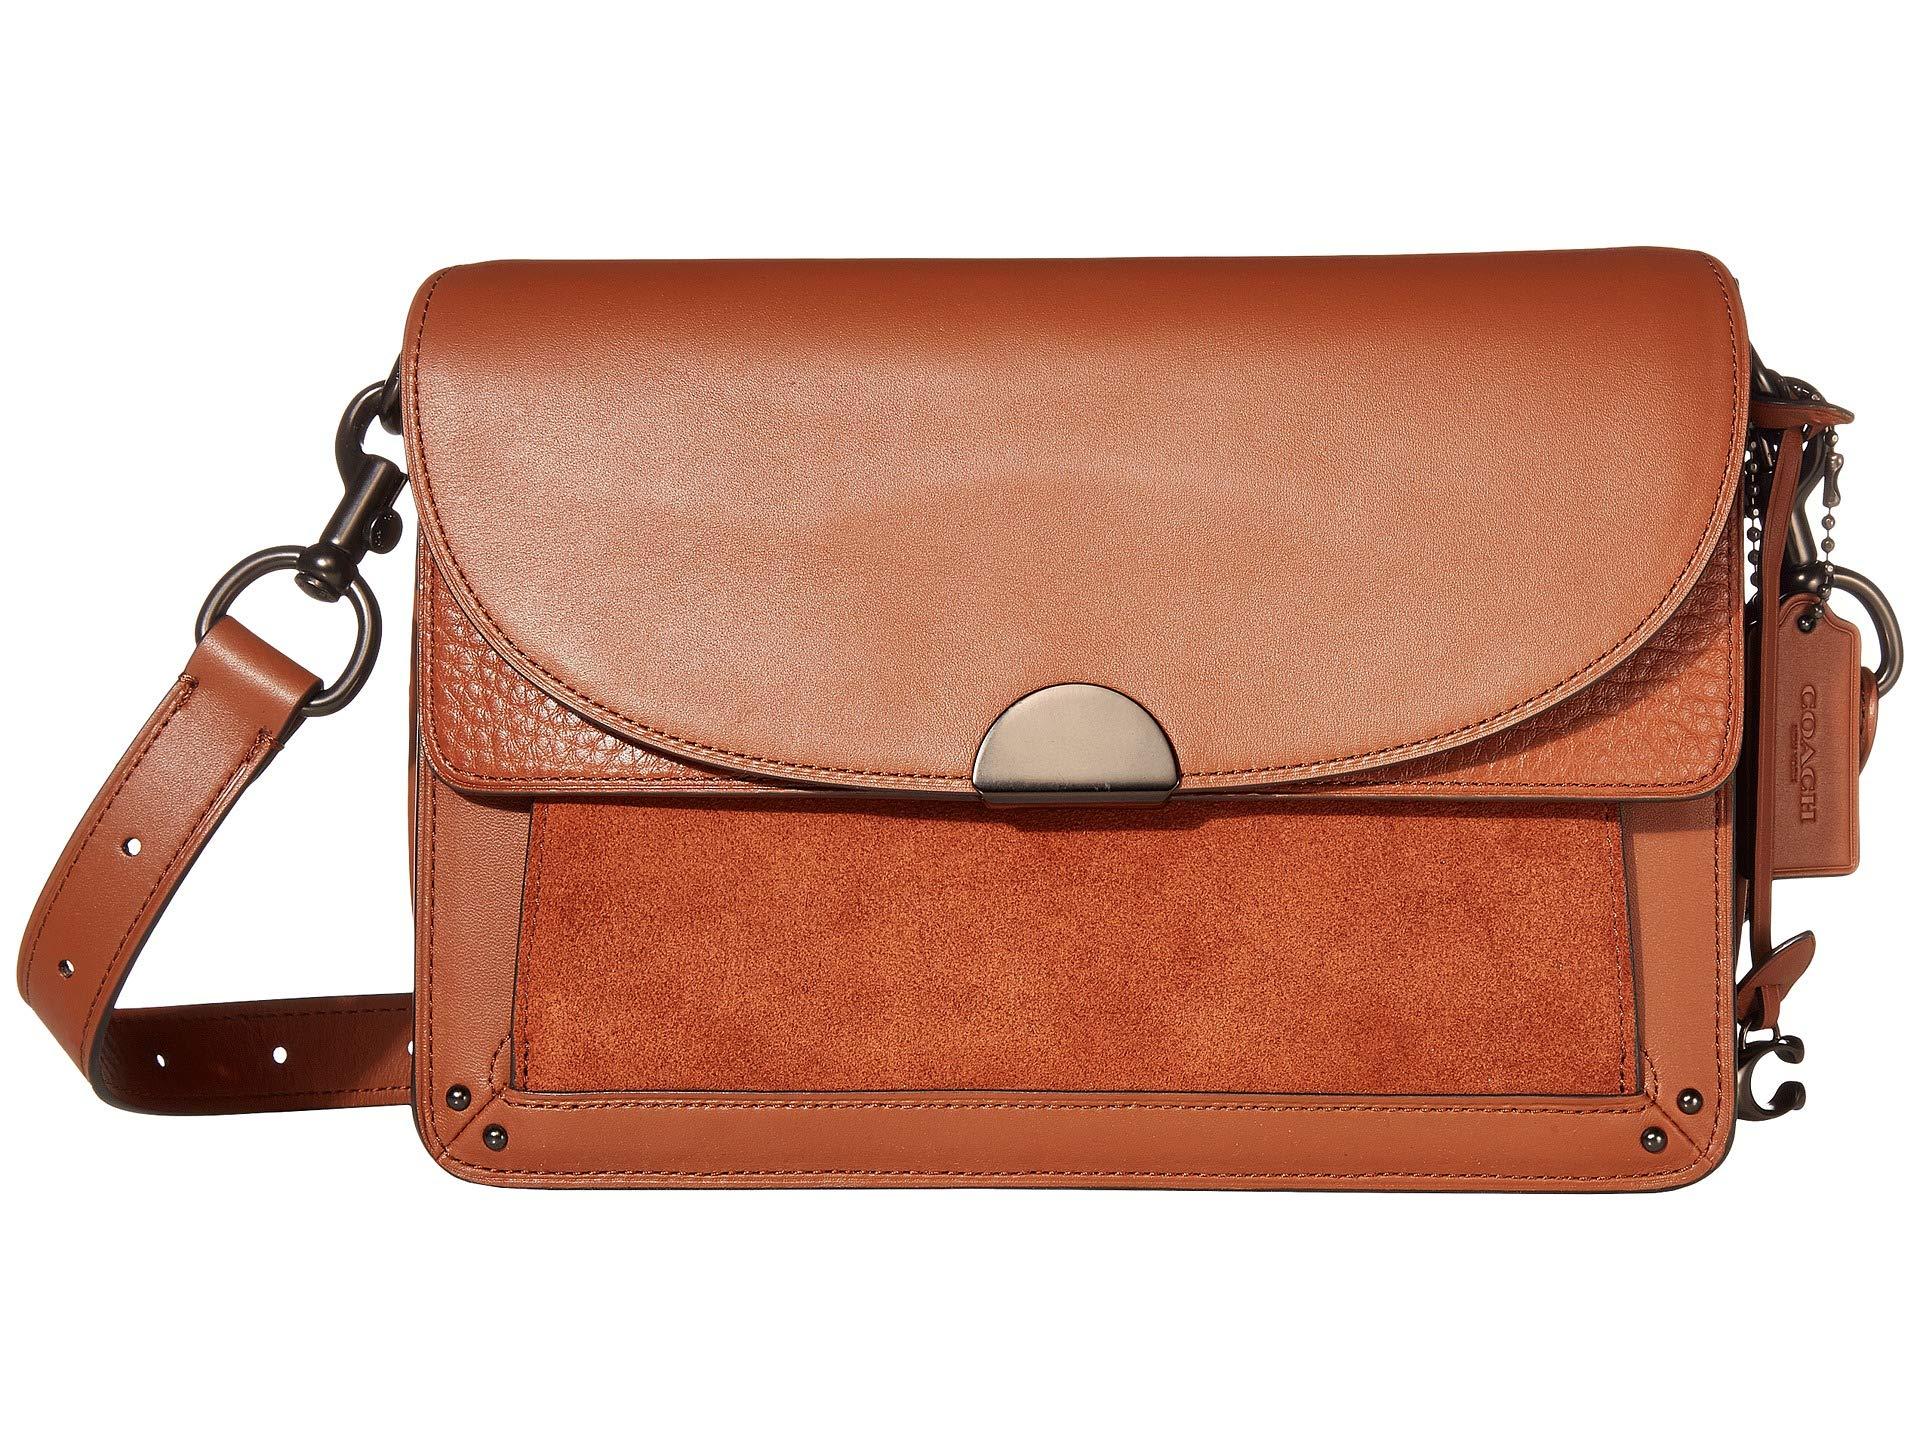 COACH Mixed Leather Dreamer Shoulder Bag in Brown - Lyst